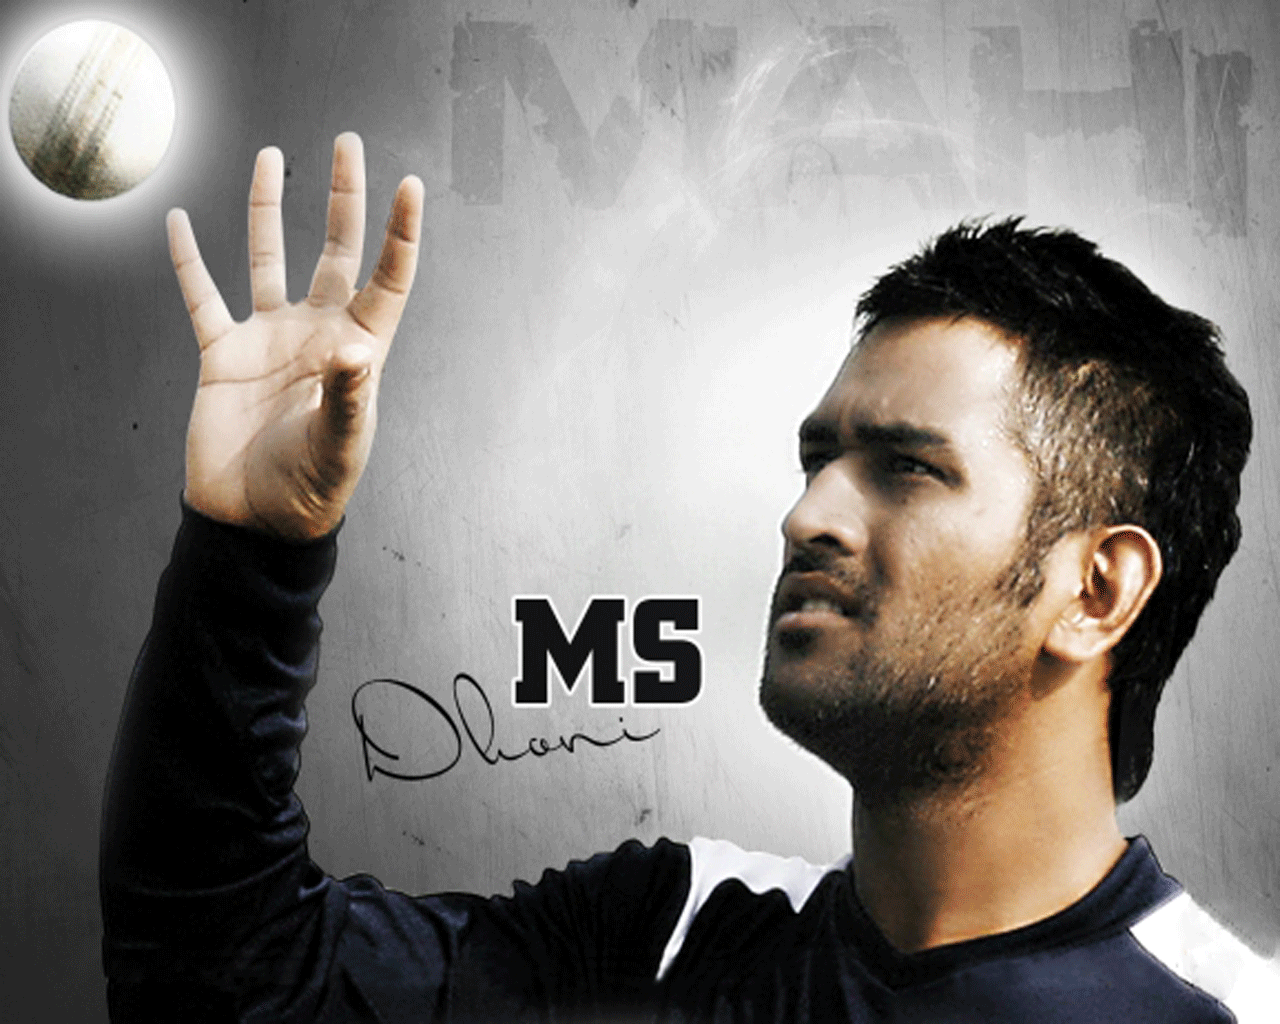 ... 2013 HD Wallpapers For Desktop | Download MS Dhoni Latest Wallpapers